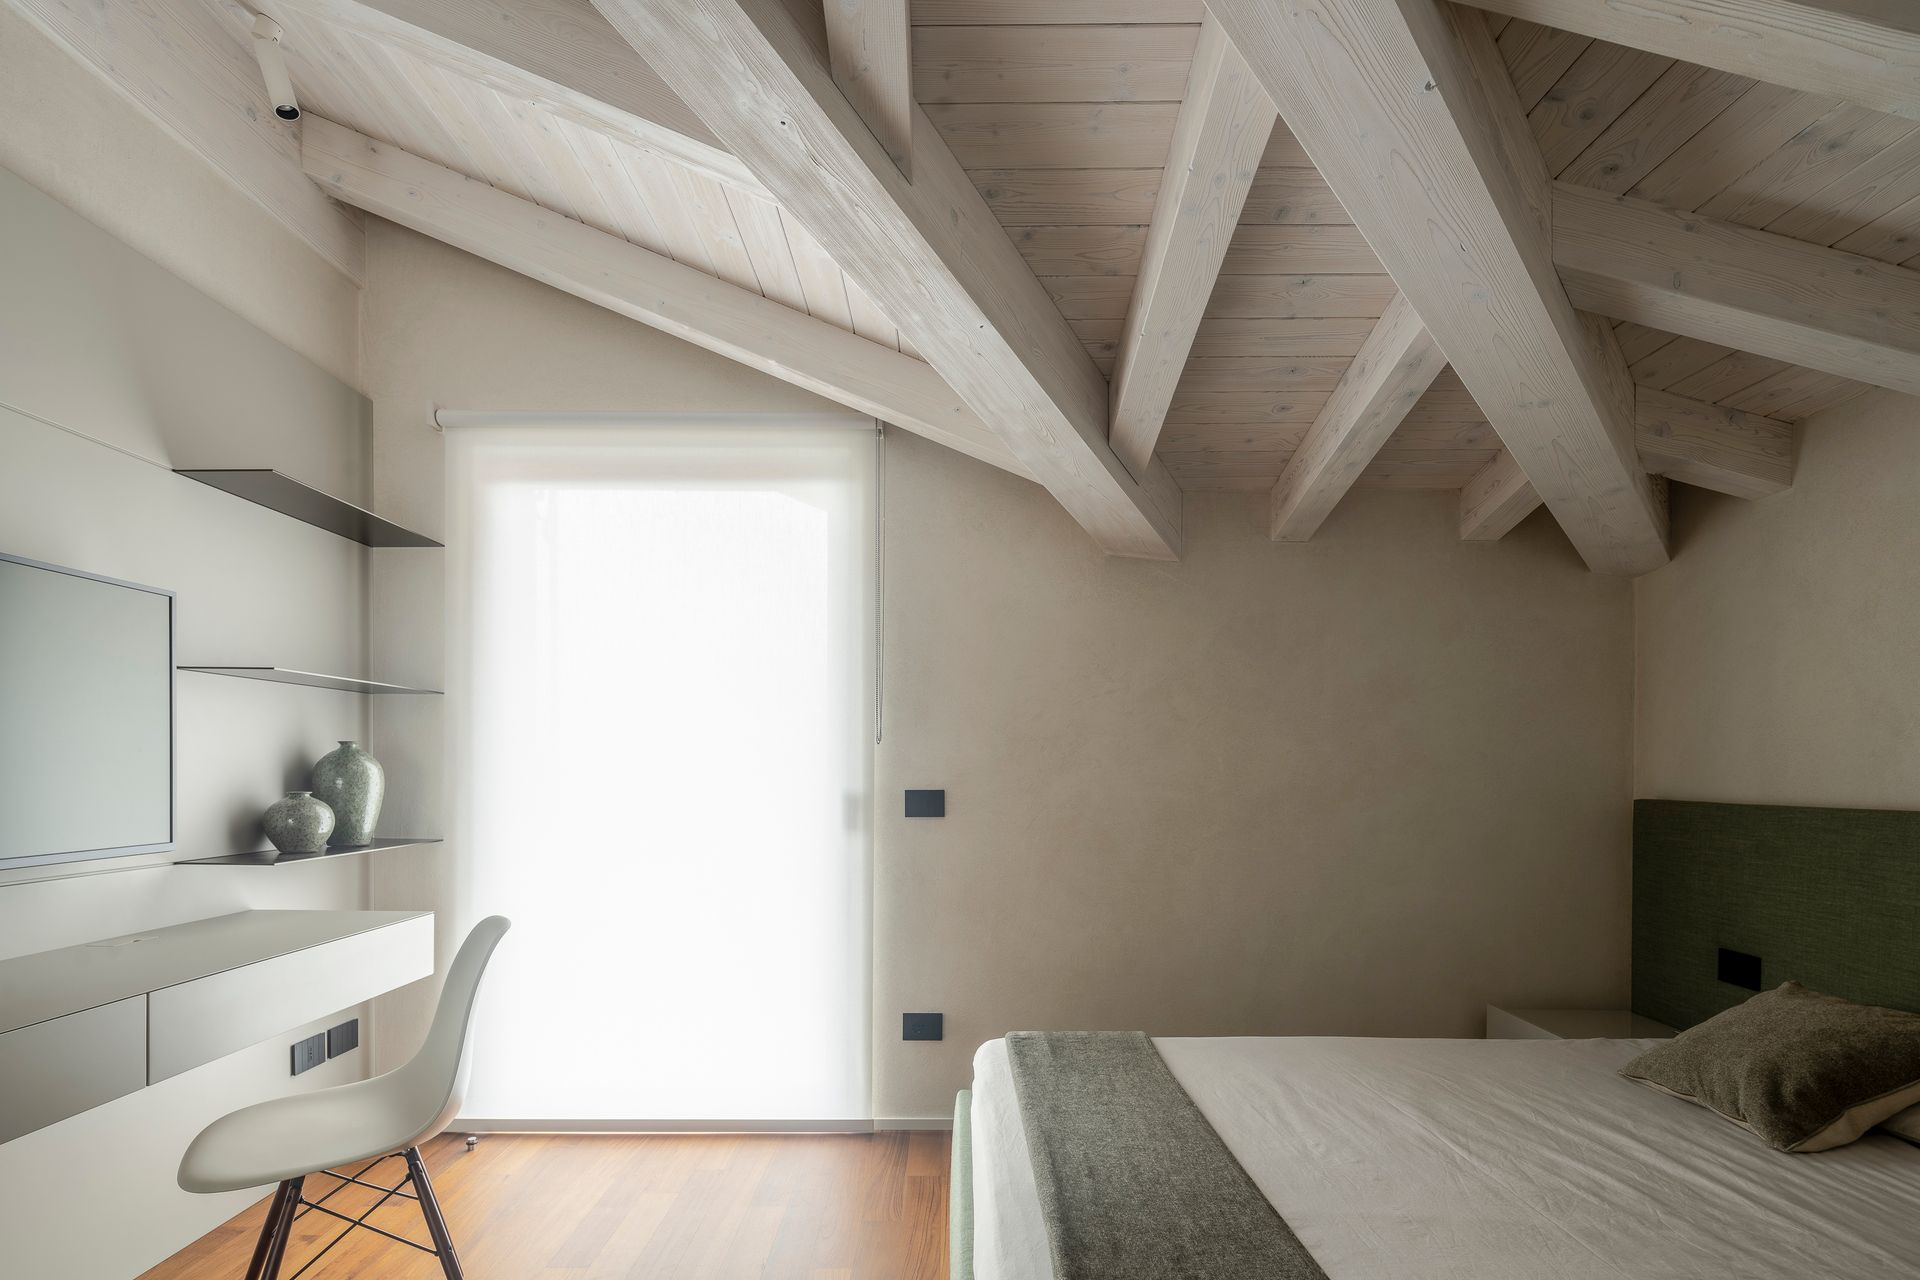 Interior design project, attic renovation with terrace with a view Bergamo, Milan, Lake Como, London, New York, Paris, Gstaad. Officina Magisafi architecture design - bedroom view